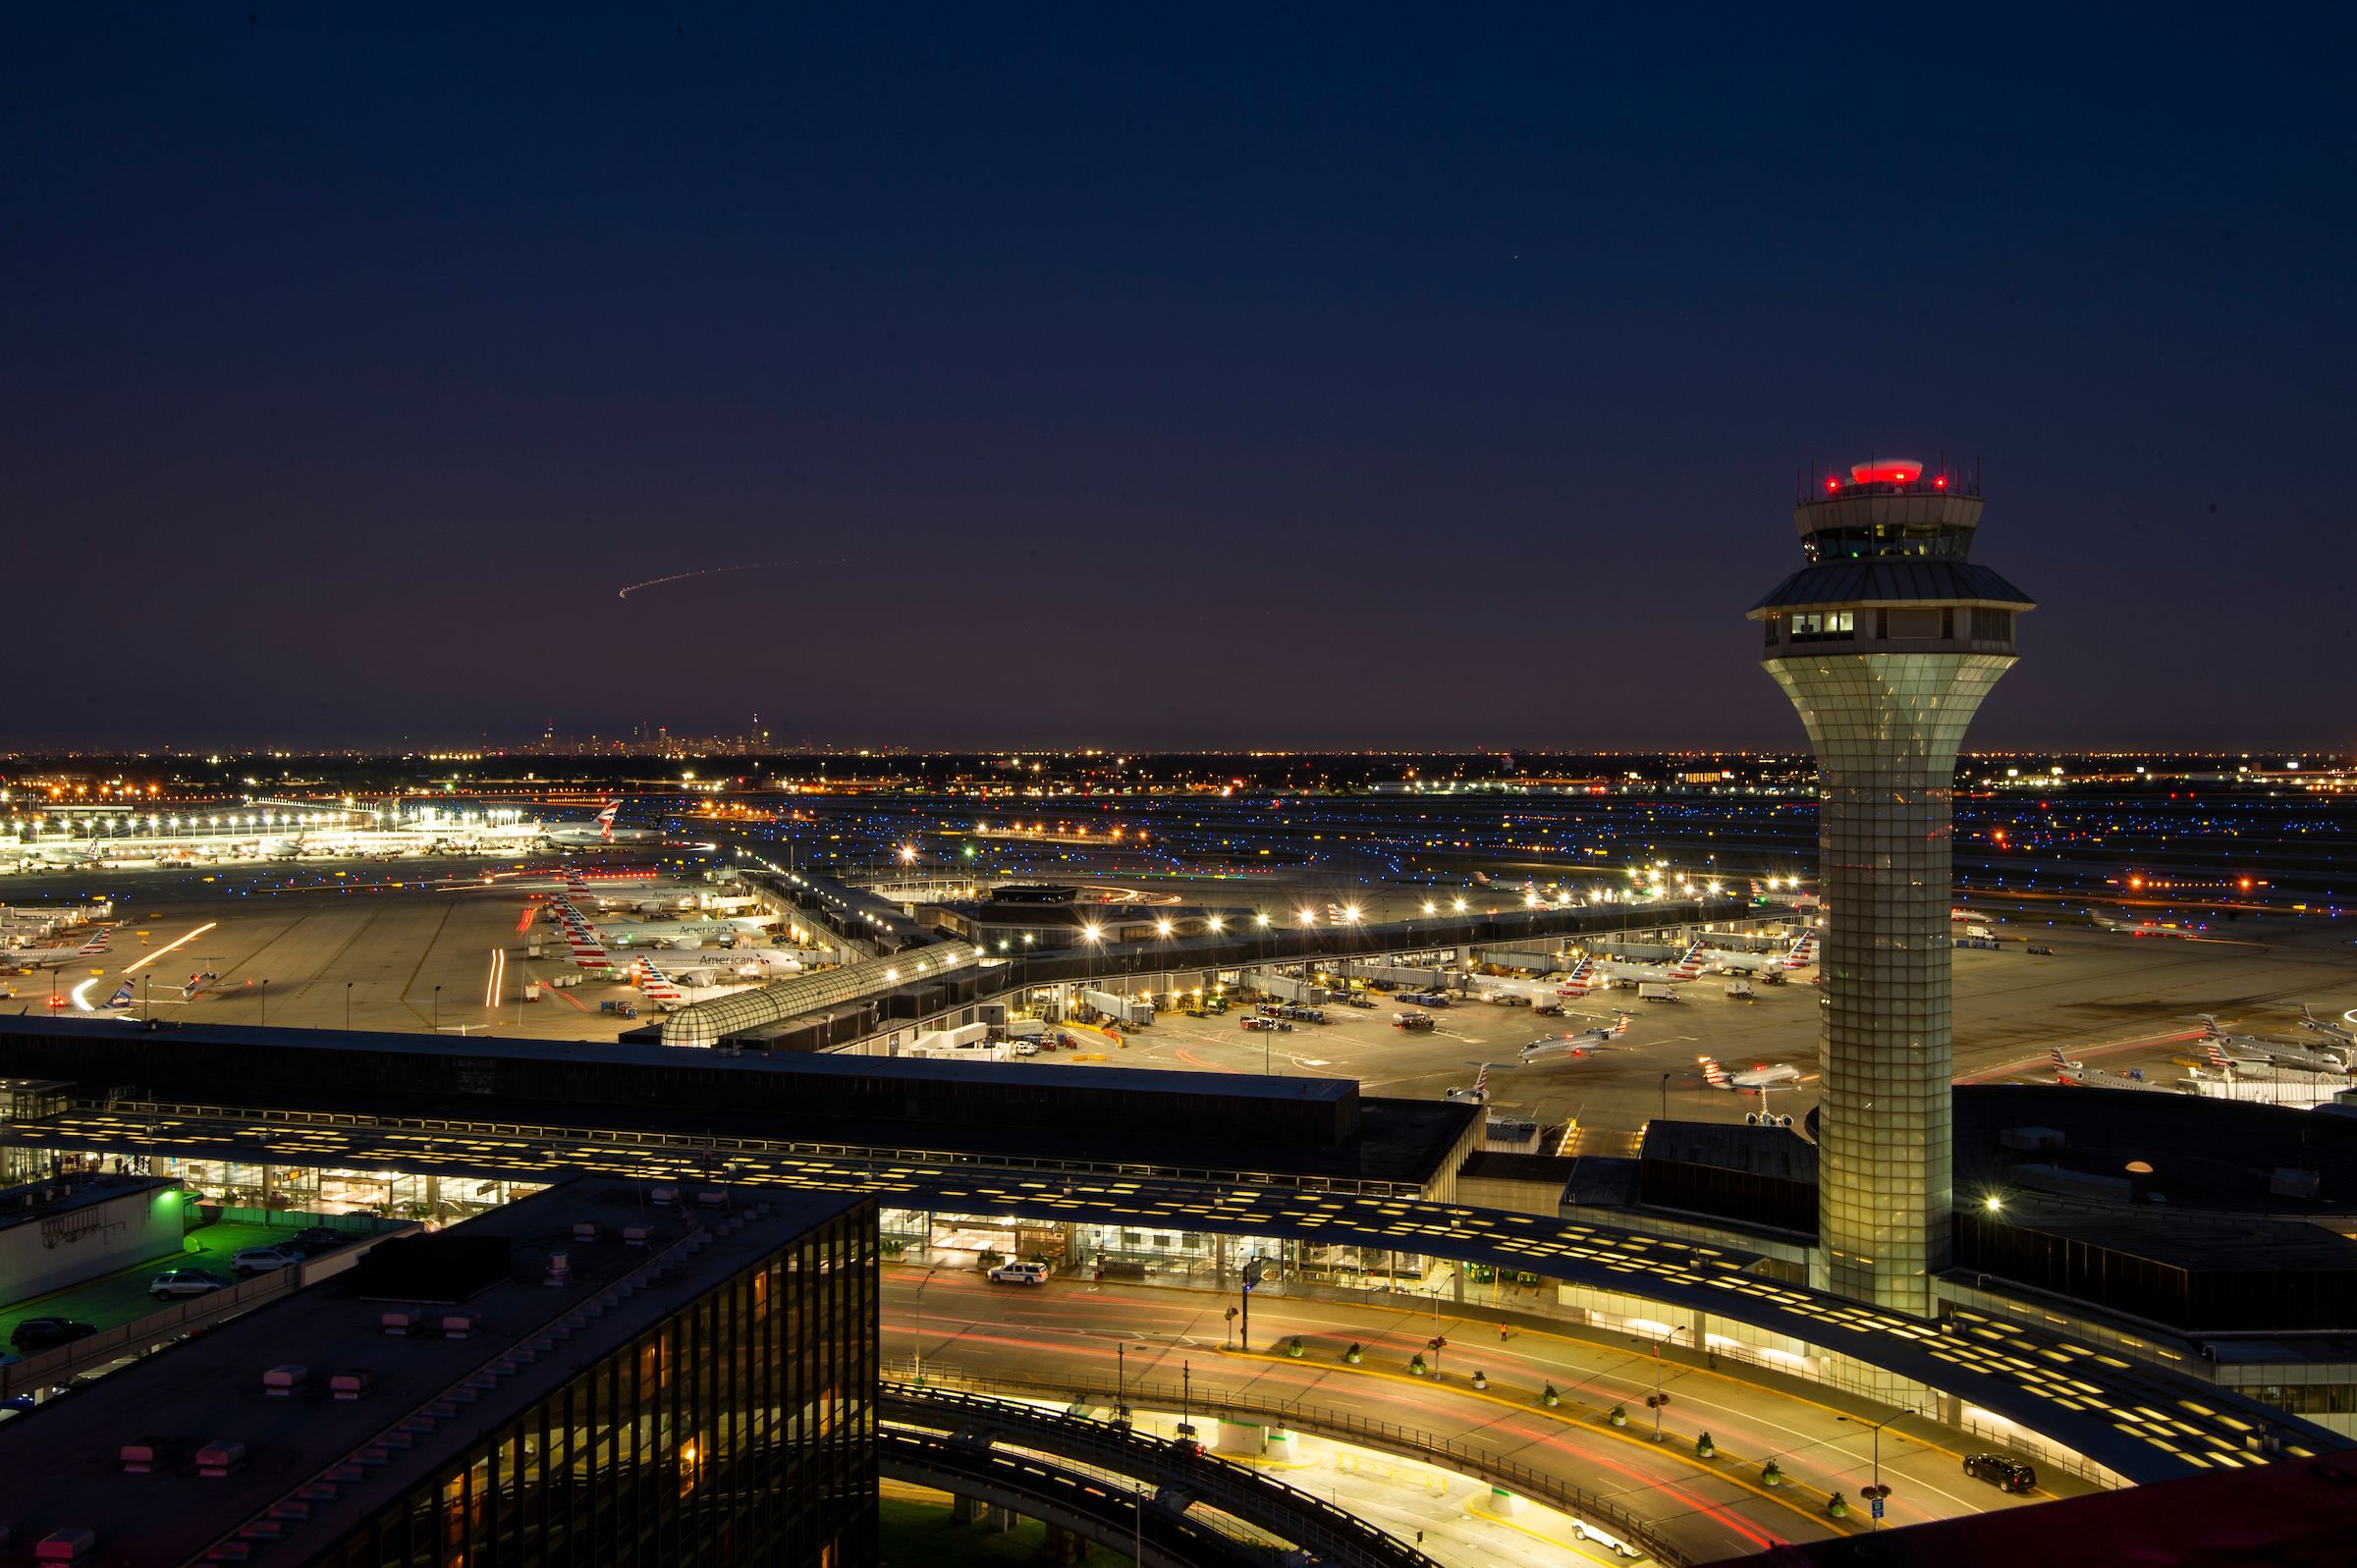 A Panoramic view of Chicago O'Hare Airport at night.